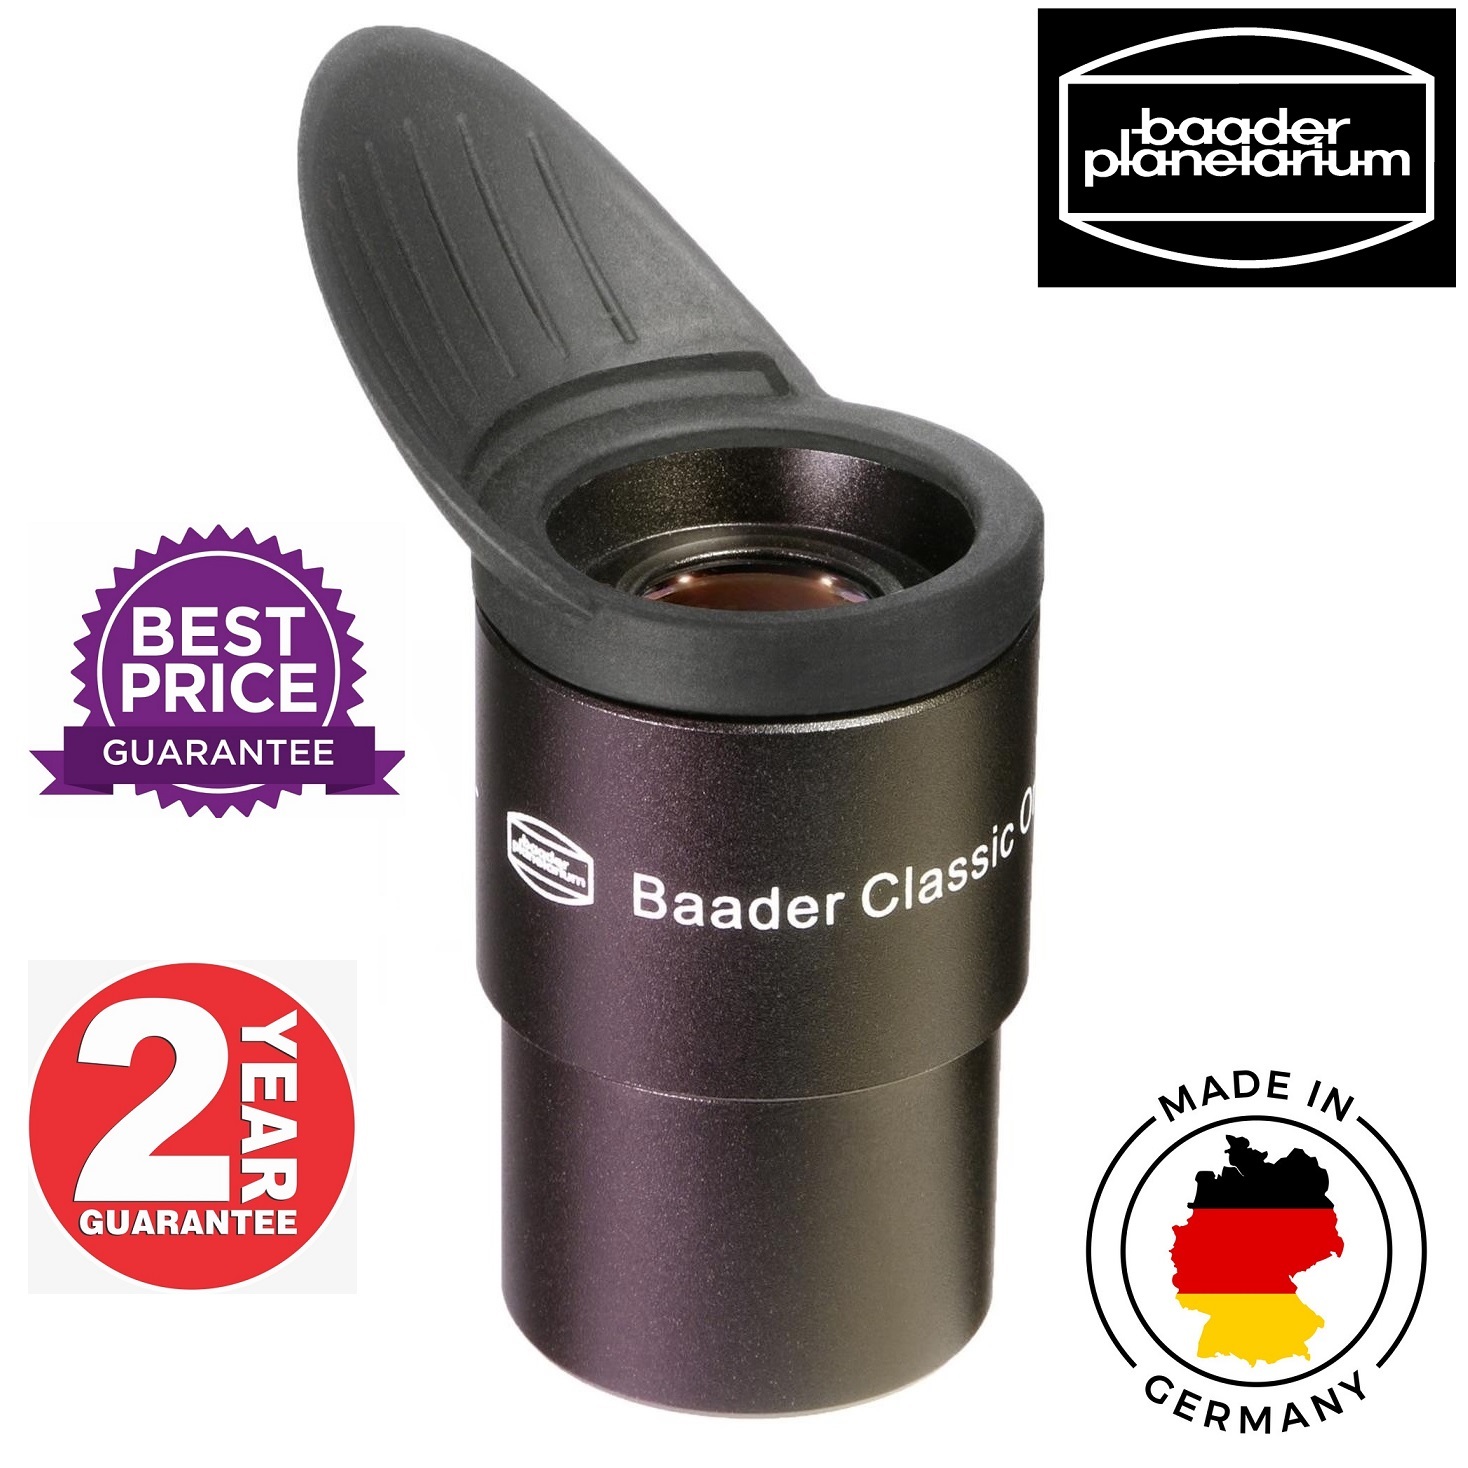 Baader 18mm Classic Ortho Eyepiece